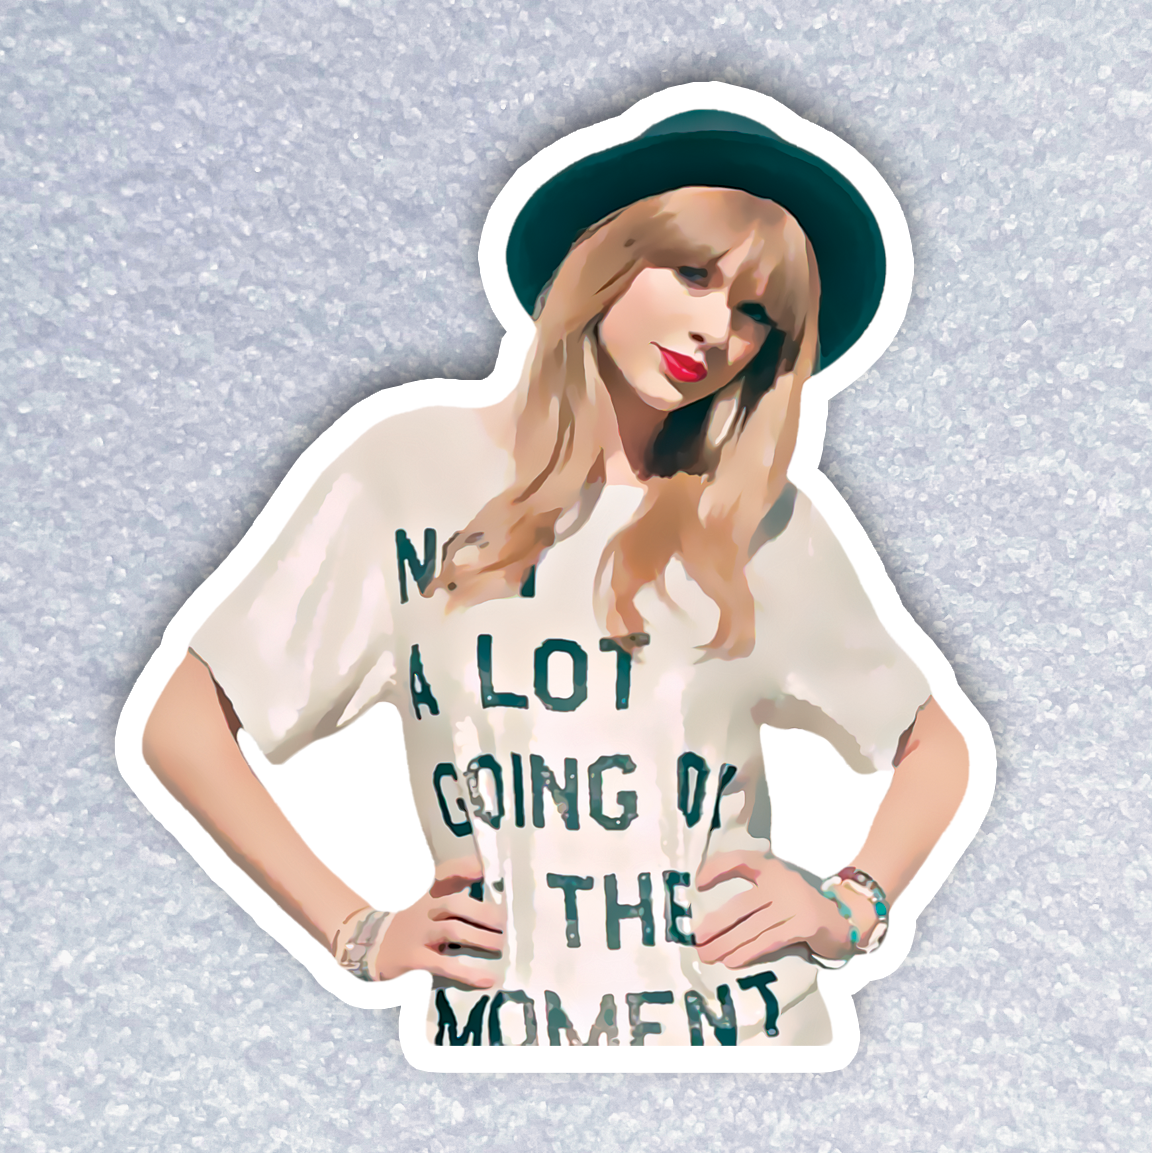 Packx27 Stickers Taylor Swift Vinilos Calcos Termos Compu, Stickers Taylor  Swift